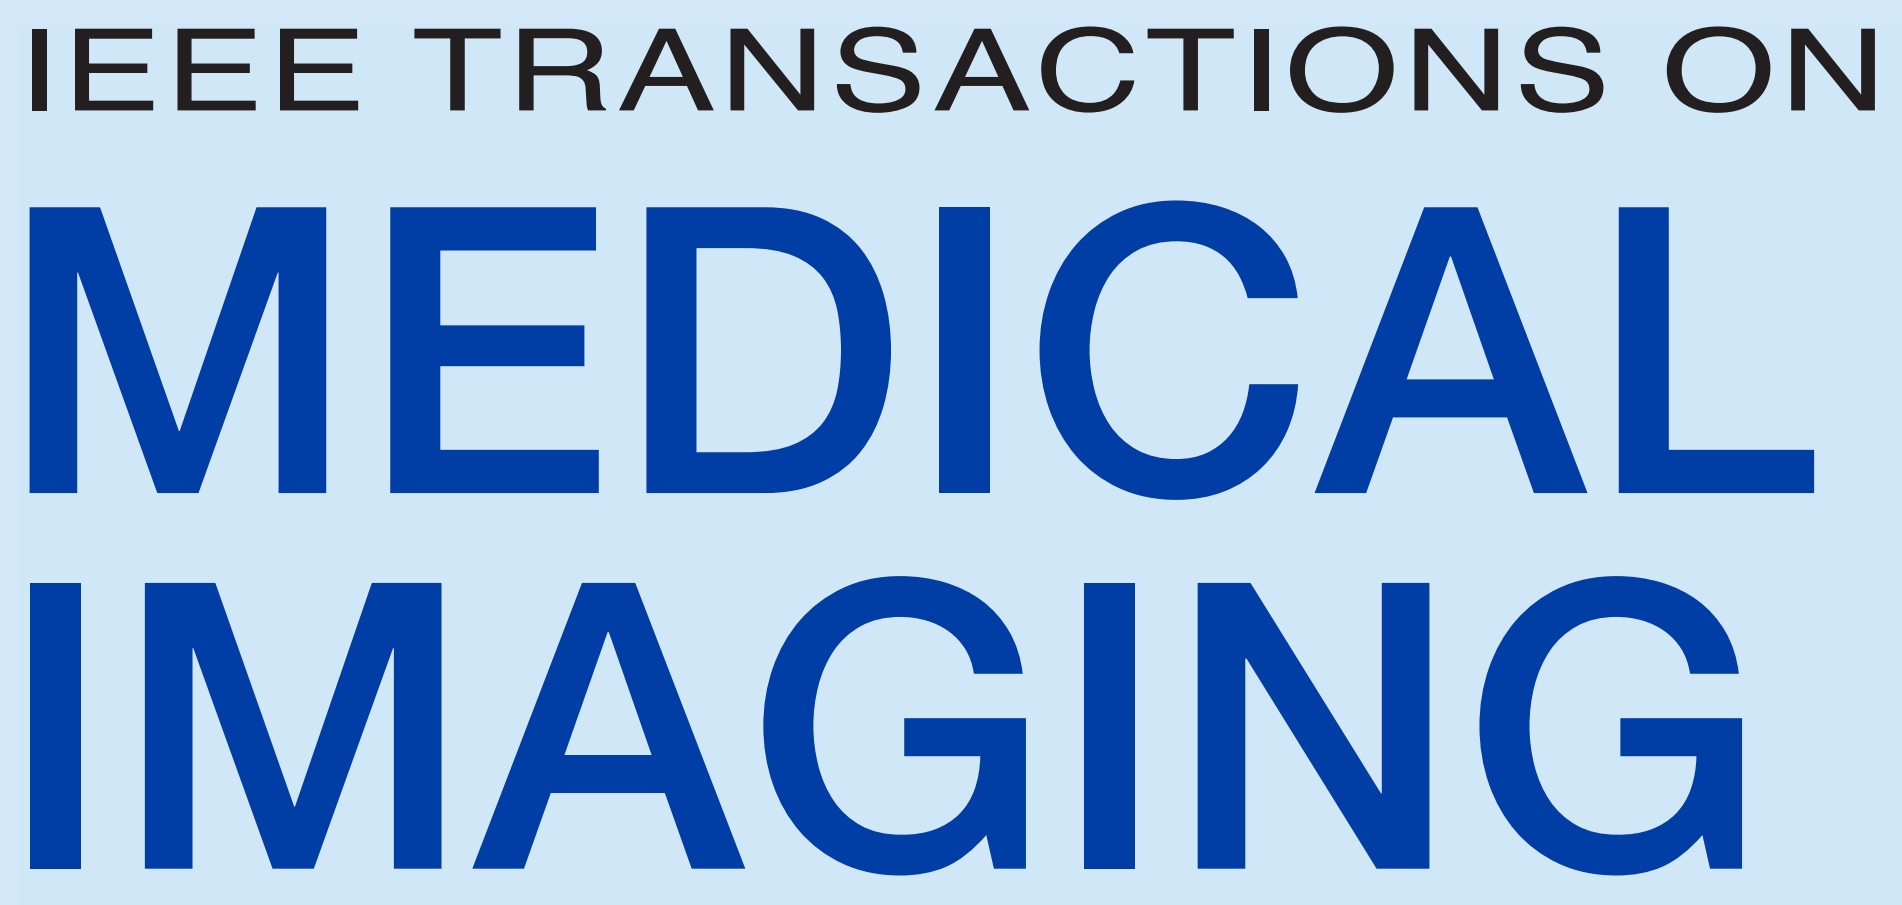 IEEE Transactions on Medical Imaging